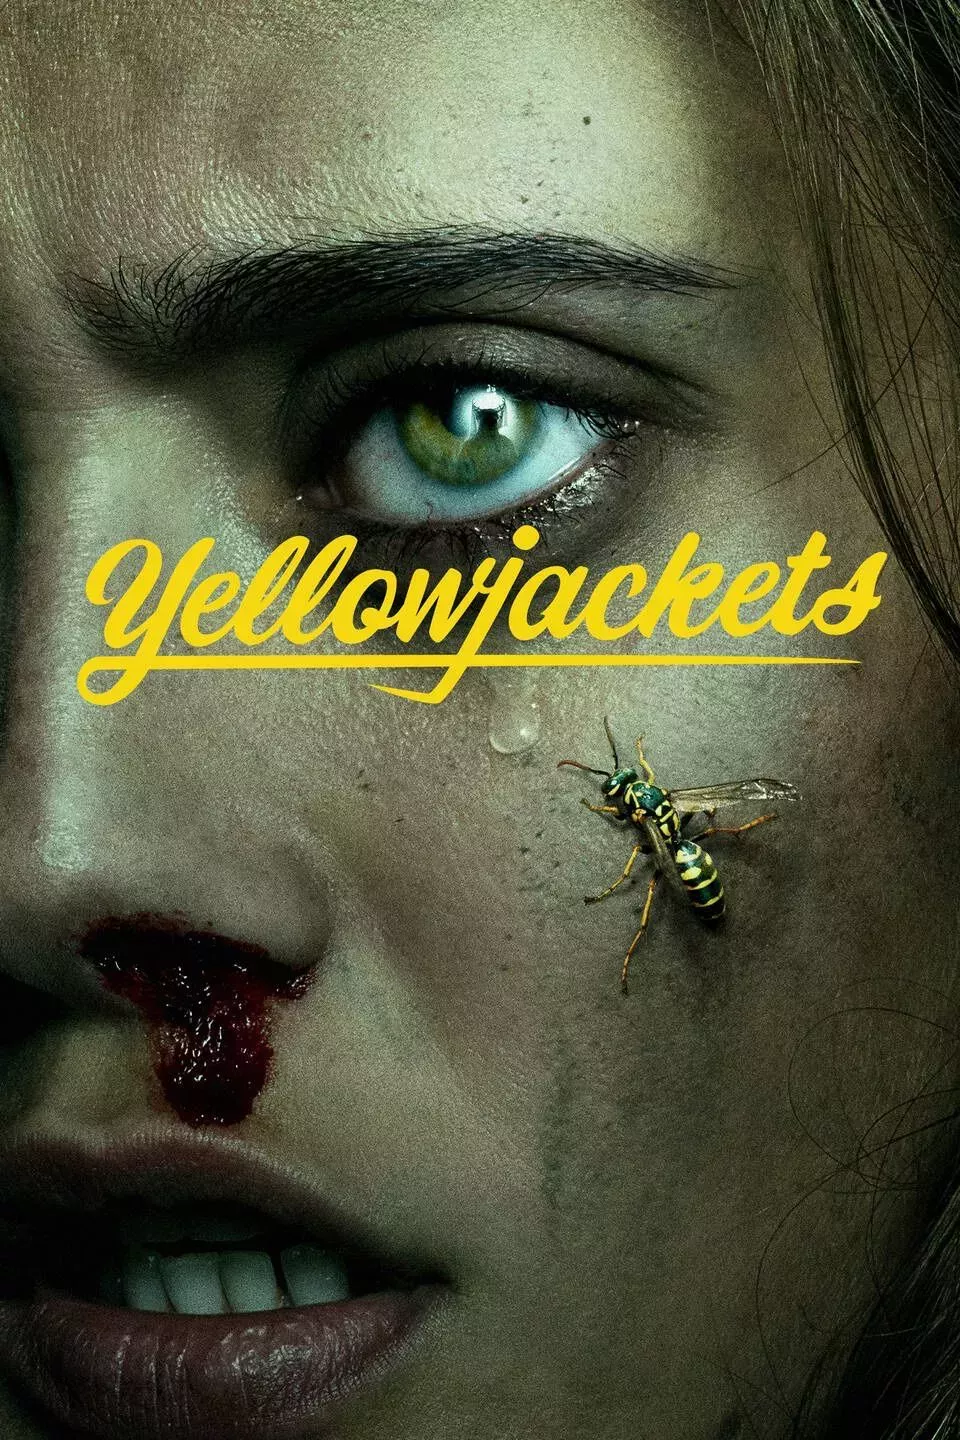 Yellowjackets Tv show poster featuring a yellowjacket crawling on a young woman's face